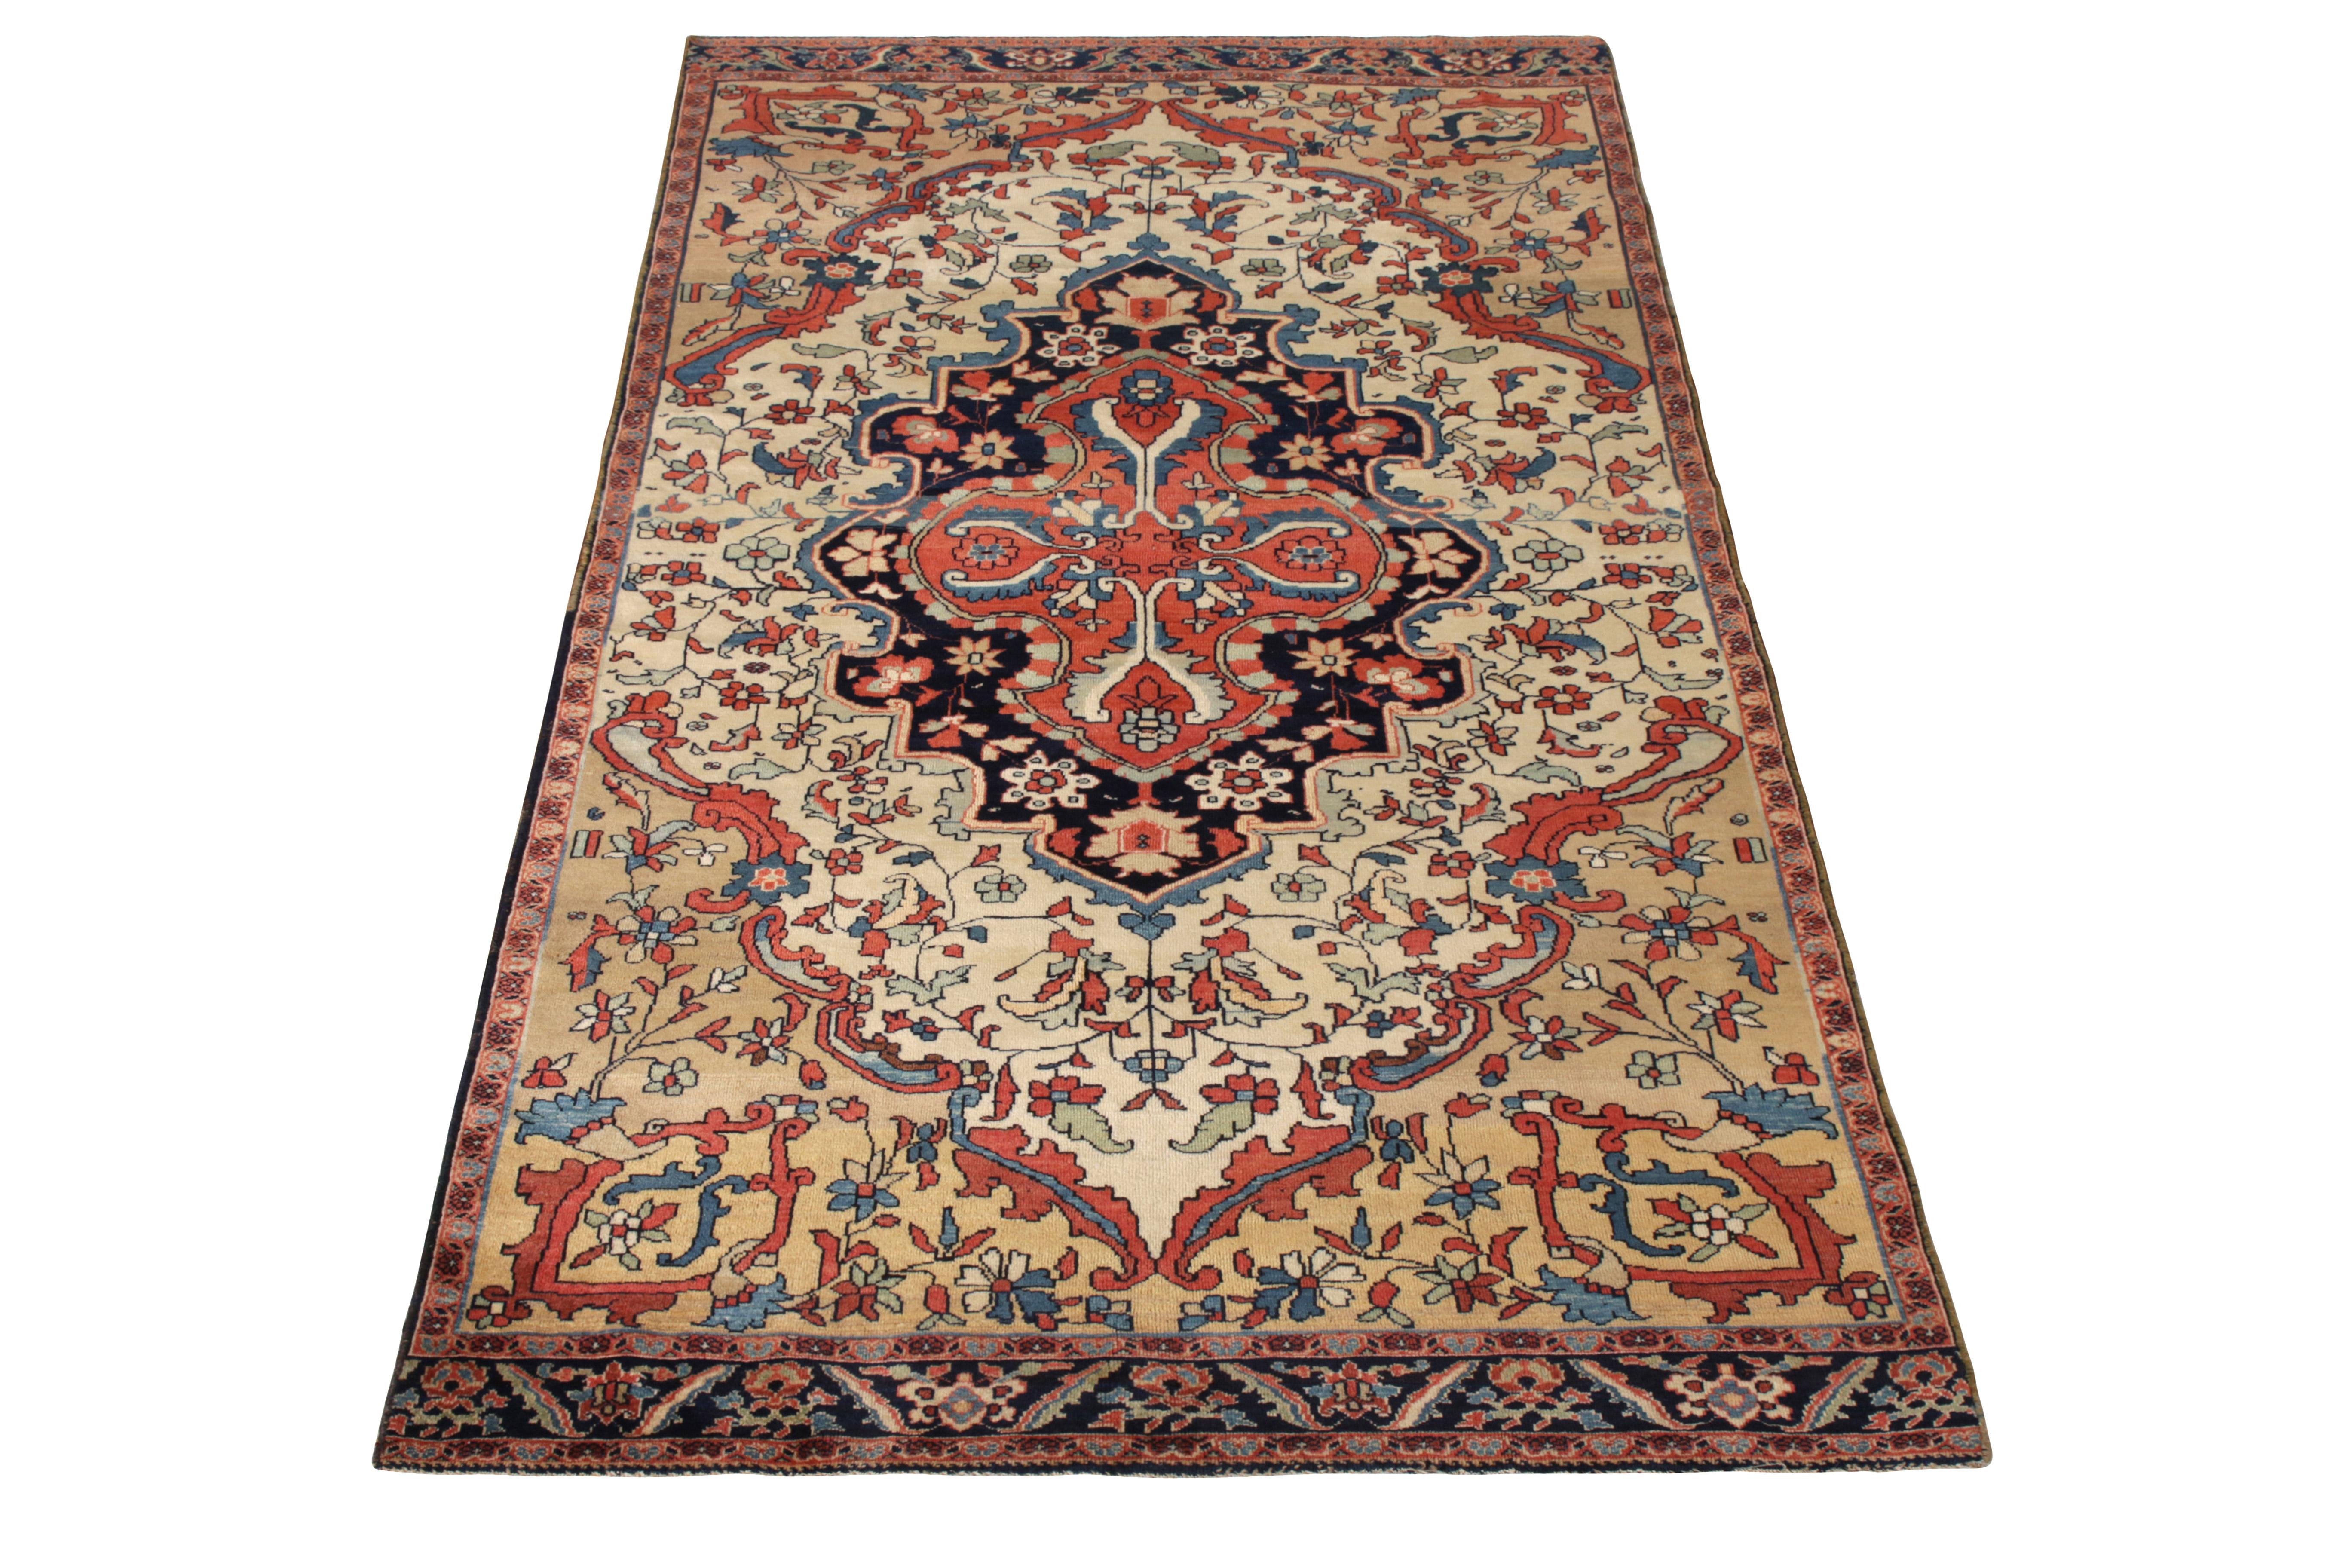 Hand-knotted in wool originating circa 1890-1900, this 3 x 7 antique Persian runner connotes a late 19th century Farahan rug design, depicted in this elegant medallion pattern in intricate red, green, and blue hues against a comfortable beige-brown